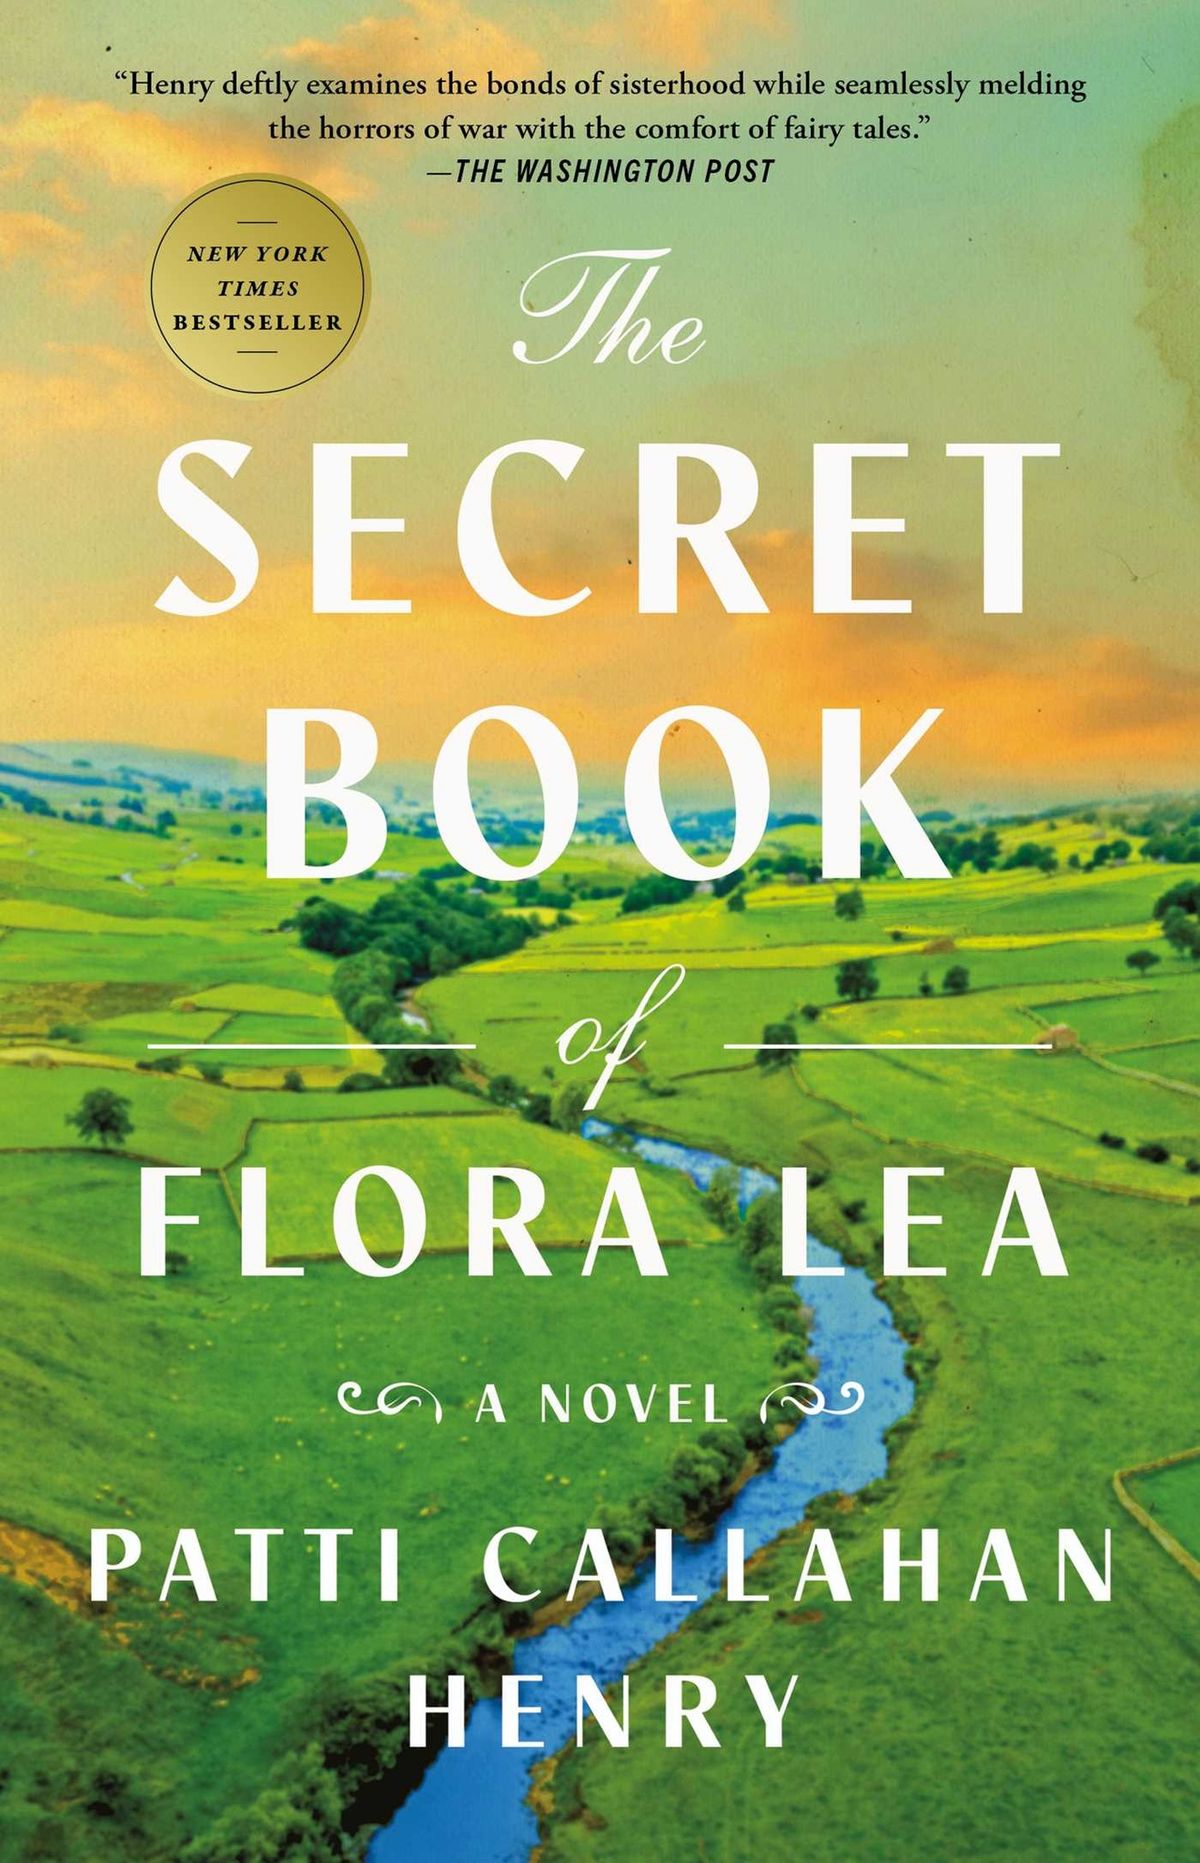 Beyond Words Book Club The Secret Book of Flora Lea by Patti Callahan Henry